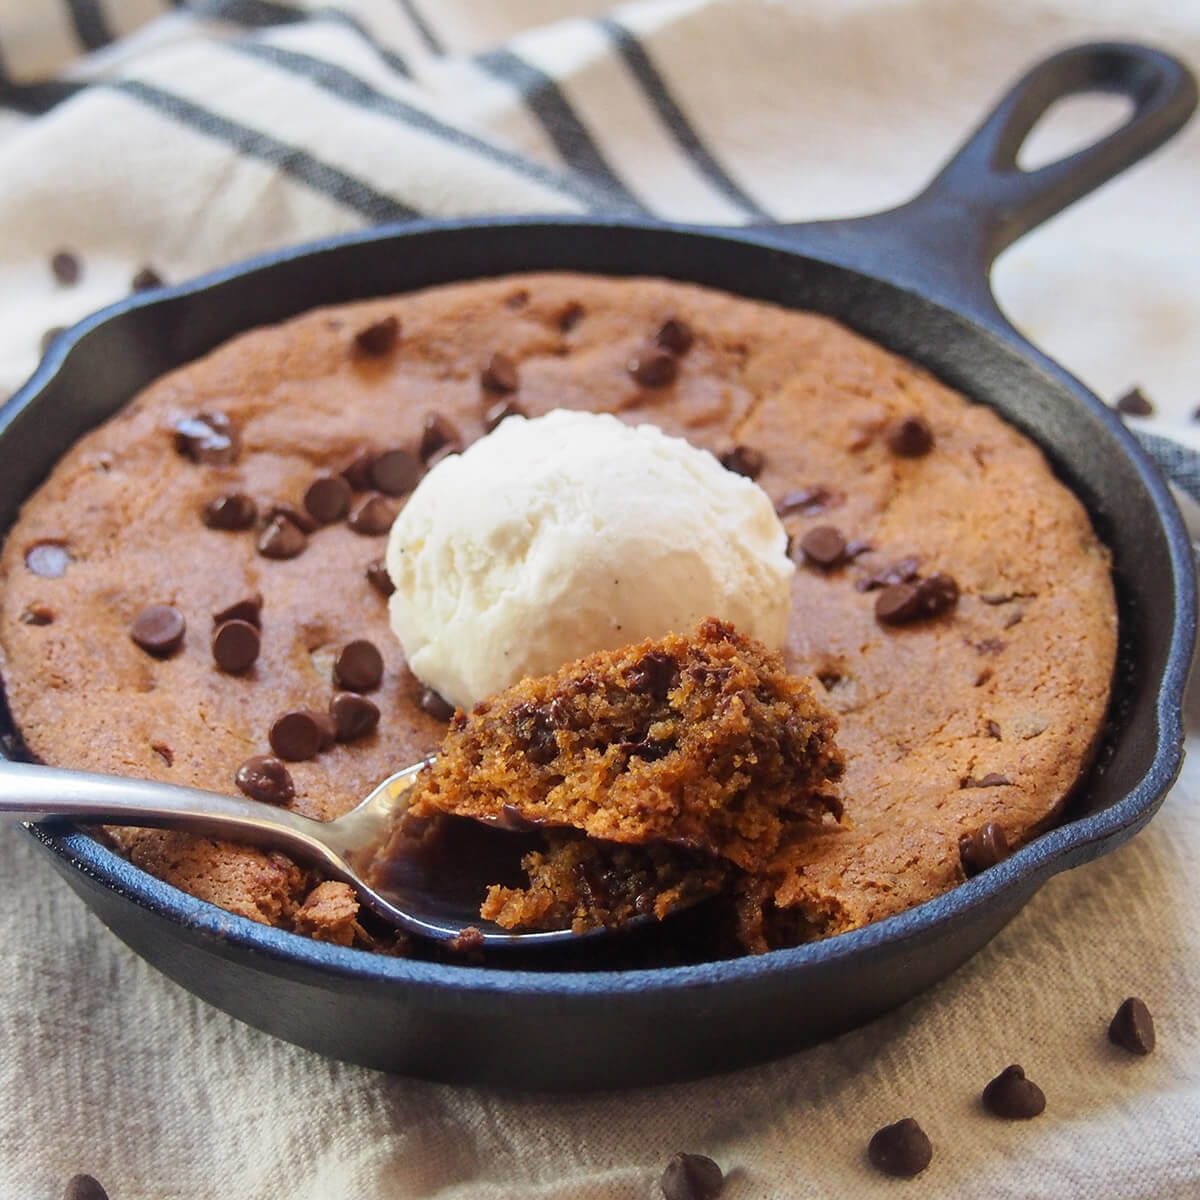 https://www.carolinescooking.com/wp-content/uploads/2023/02/mini-skillet-cookie-featured-pic-sq.jpg